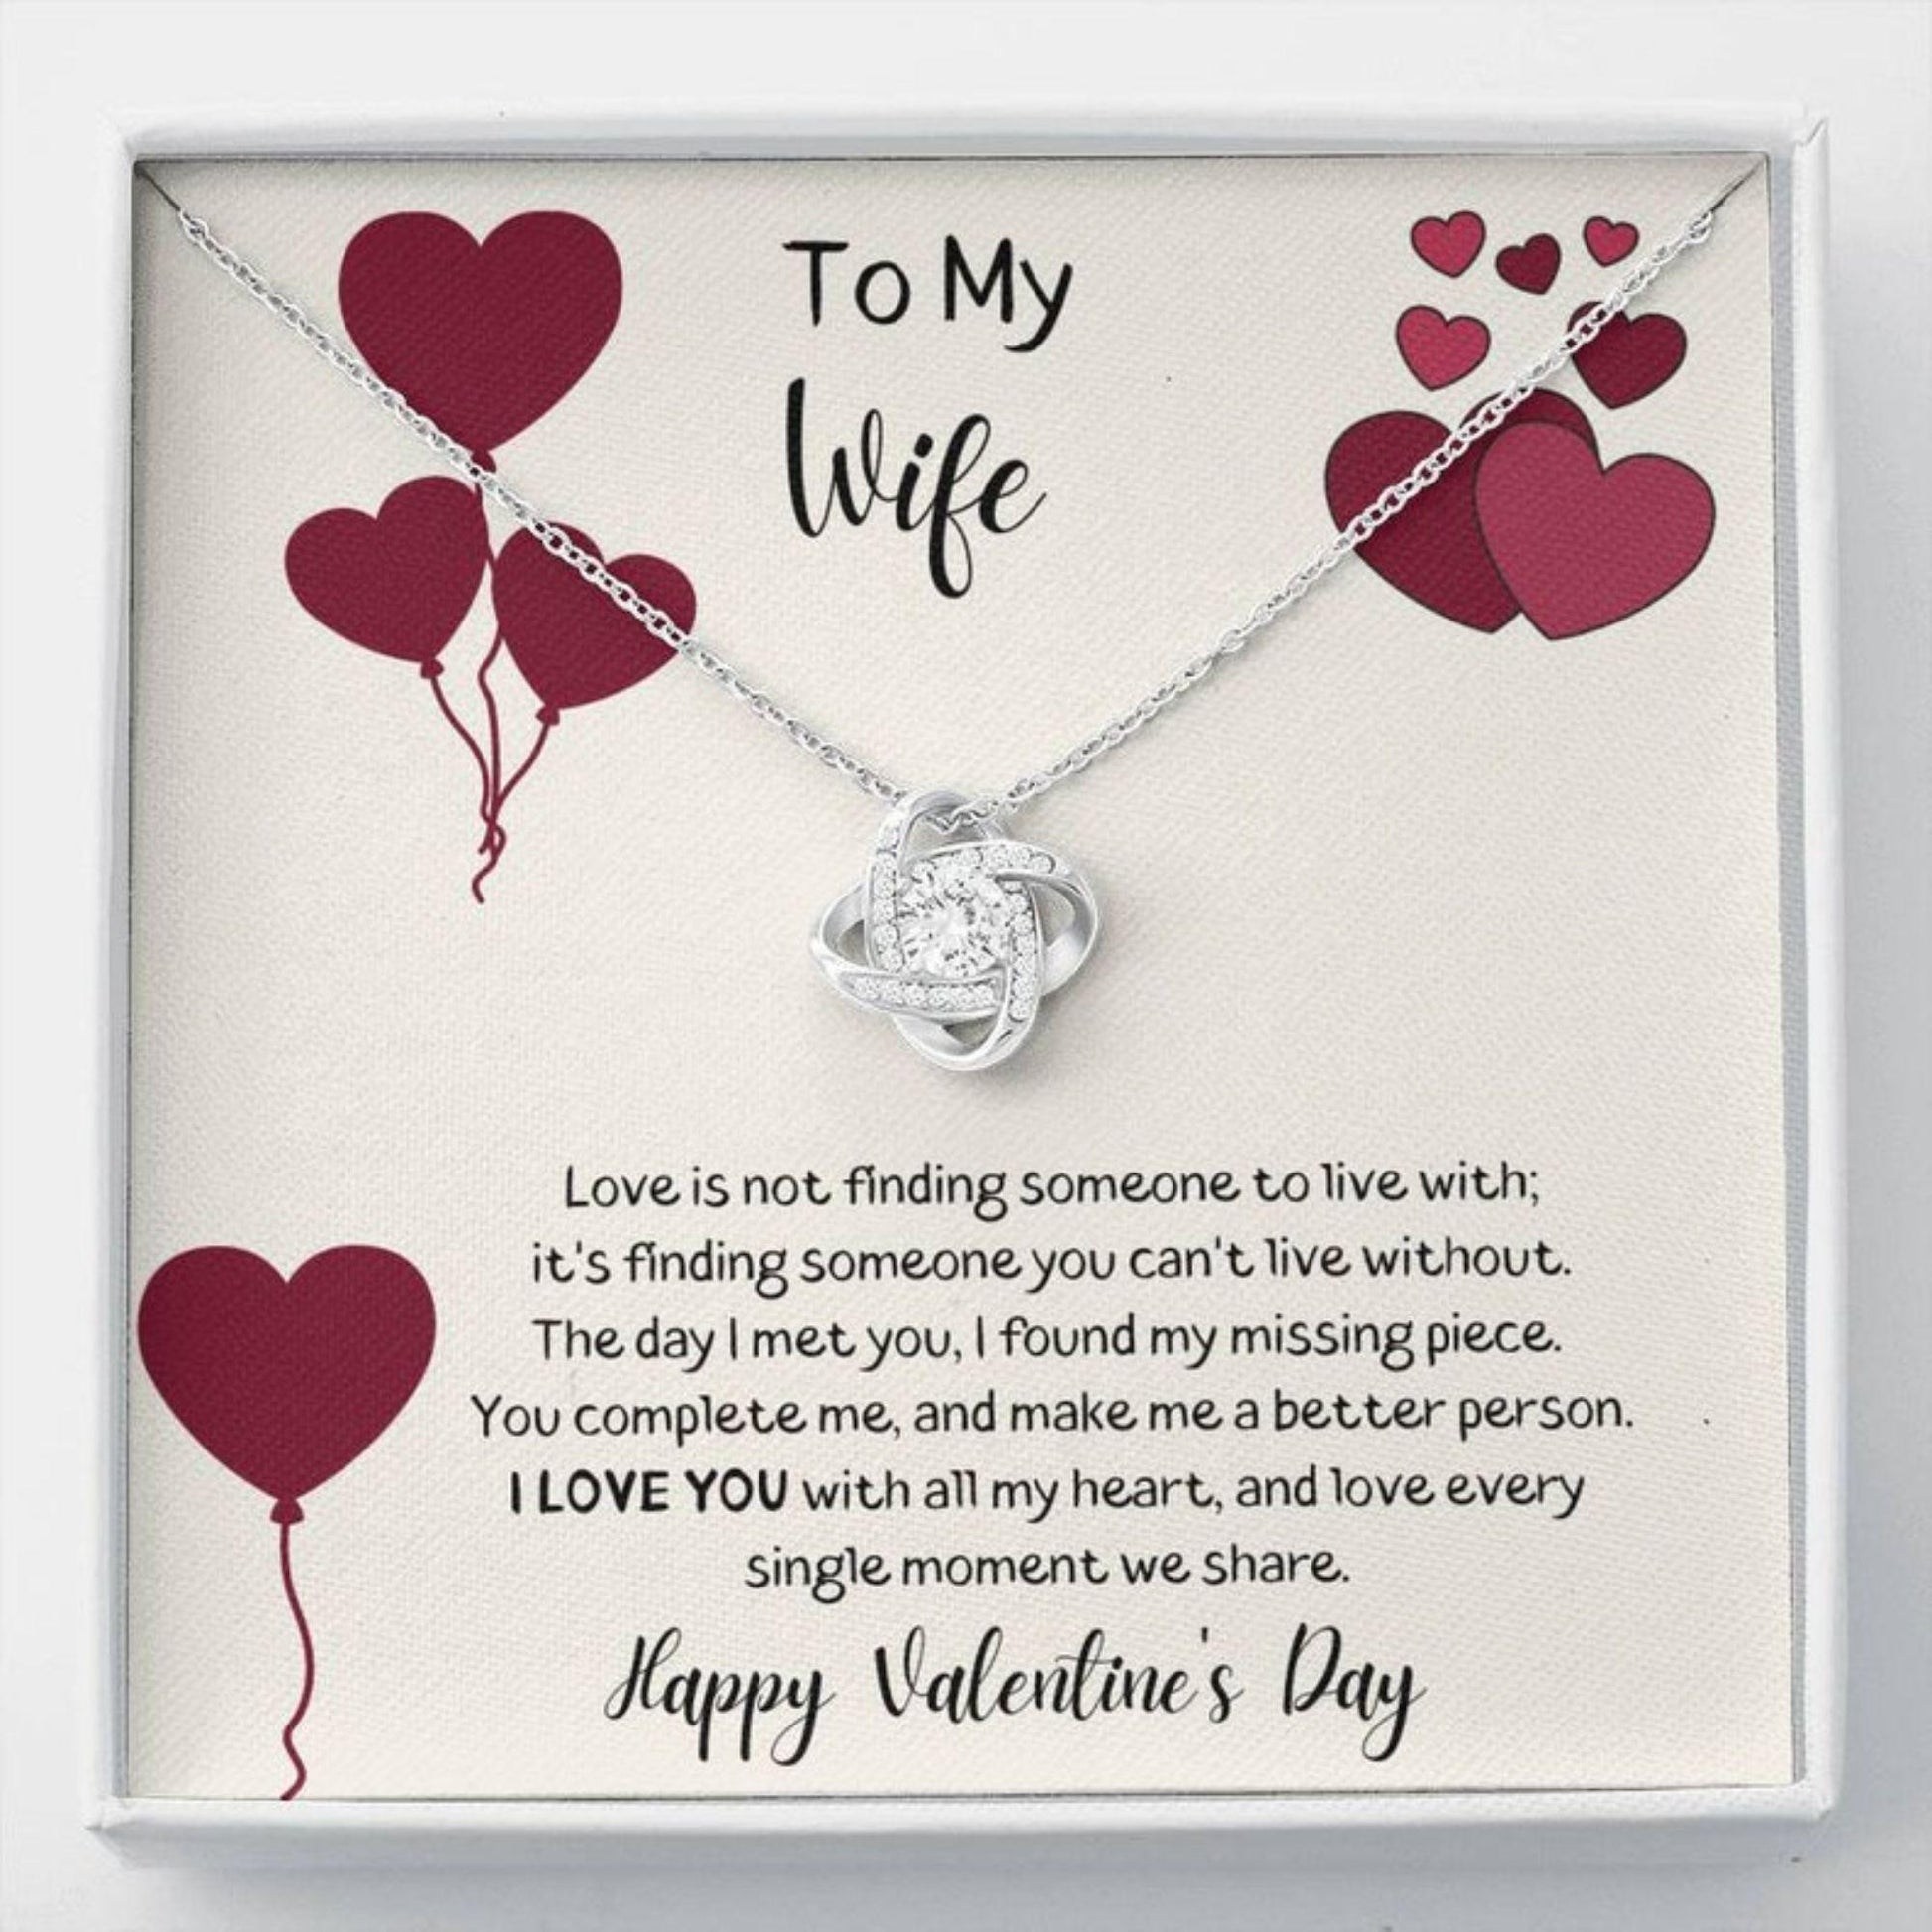 Wife Necklace, To My Wife "I Love You", Valentines Necklace For Wife, Valentines Necklace For Wife, Gift For Wife To Valentines Day